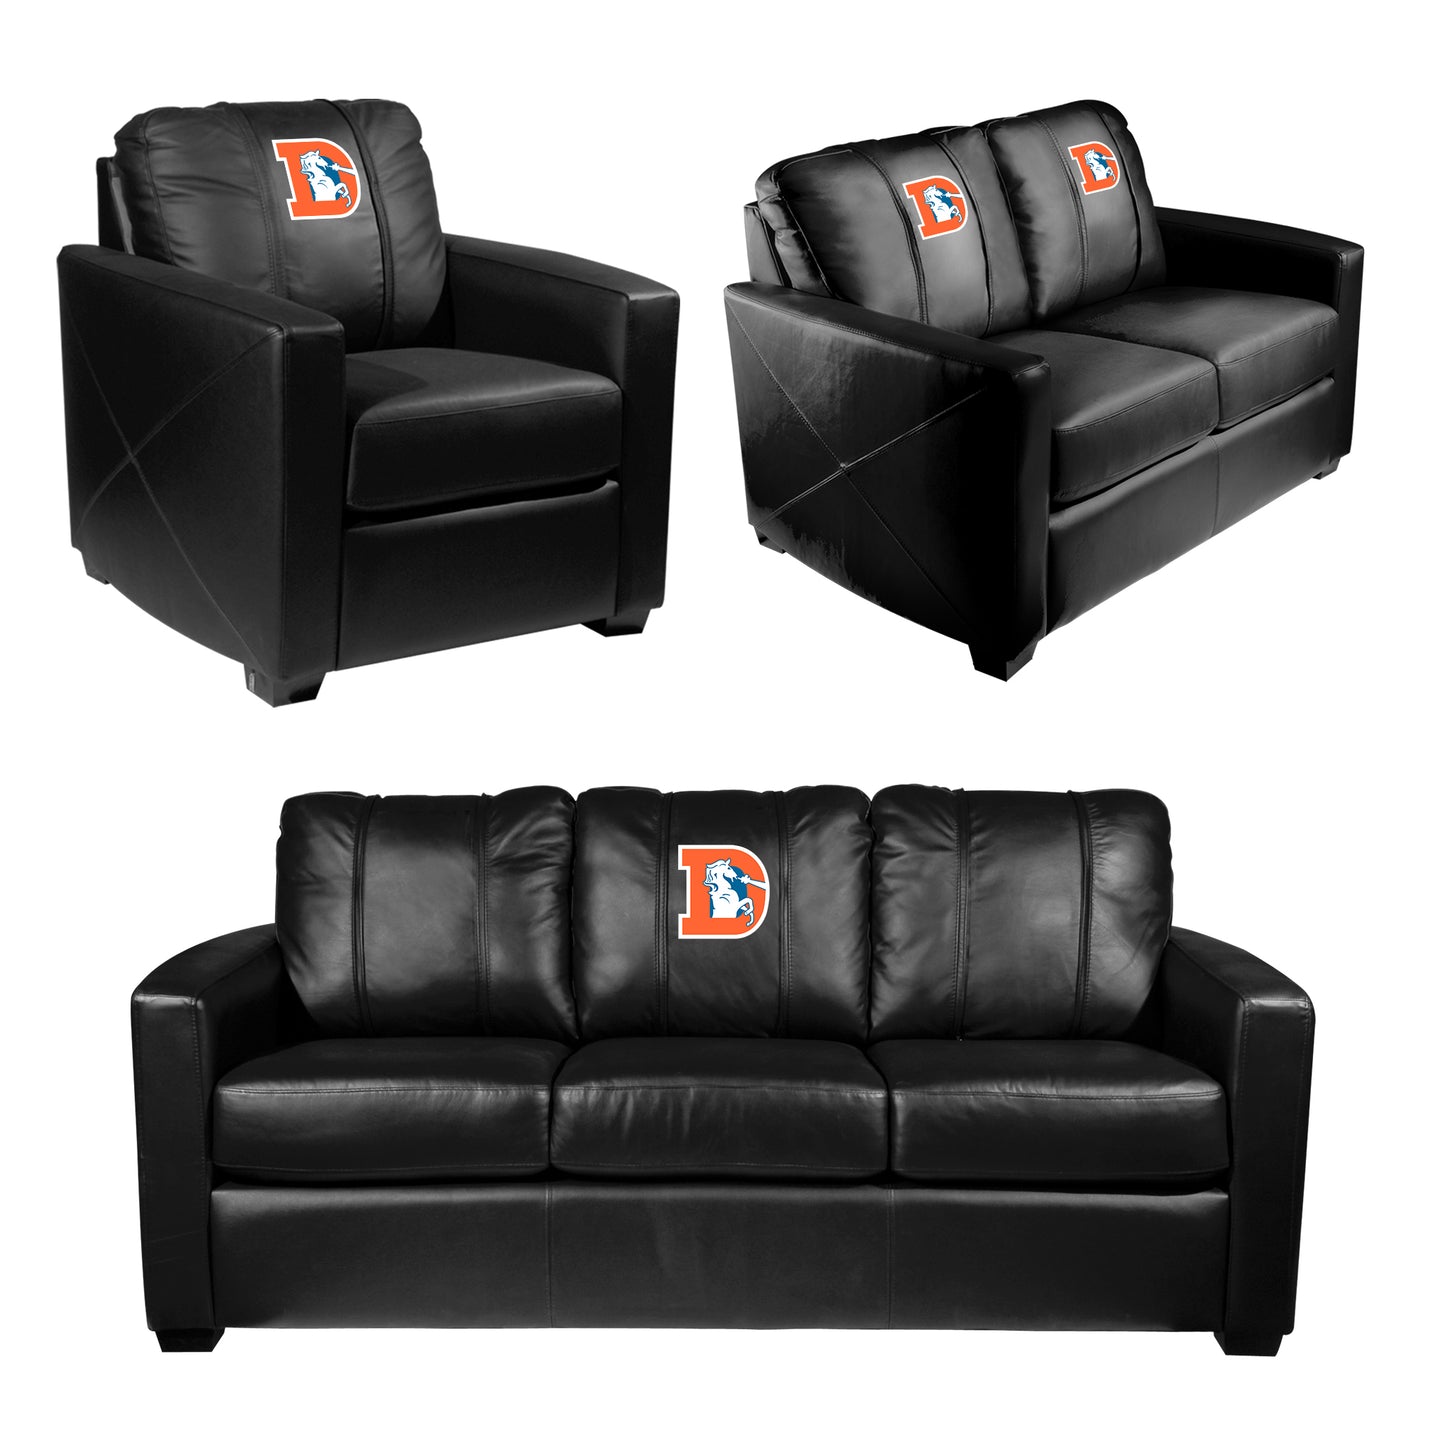 Silver Loveseat with Denver Broncos Classic Logo